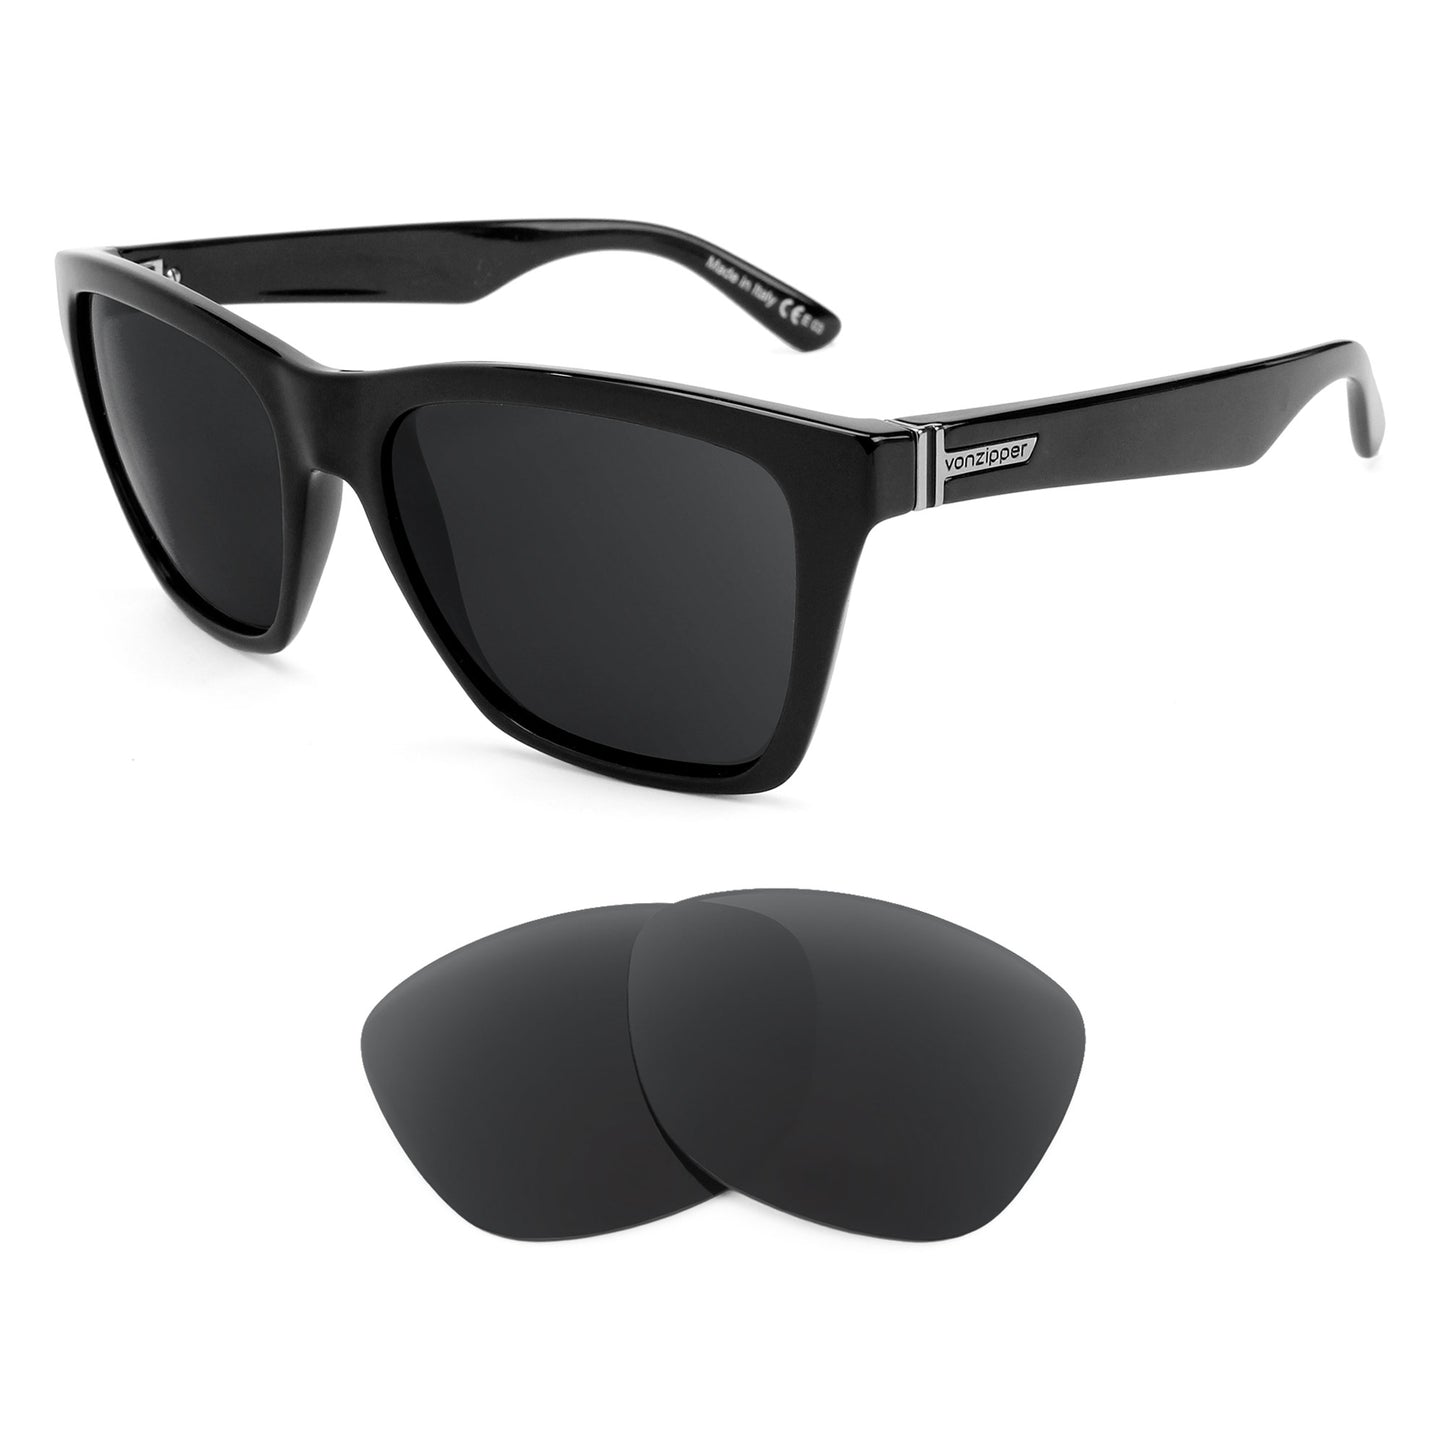 VonZipper Booker sunglasses with replacement lenses